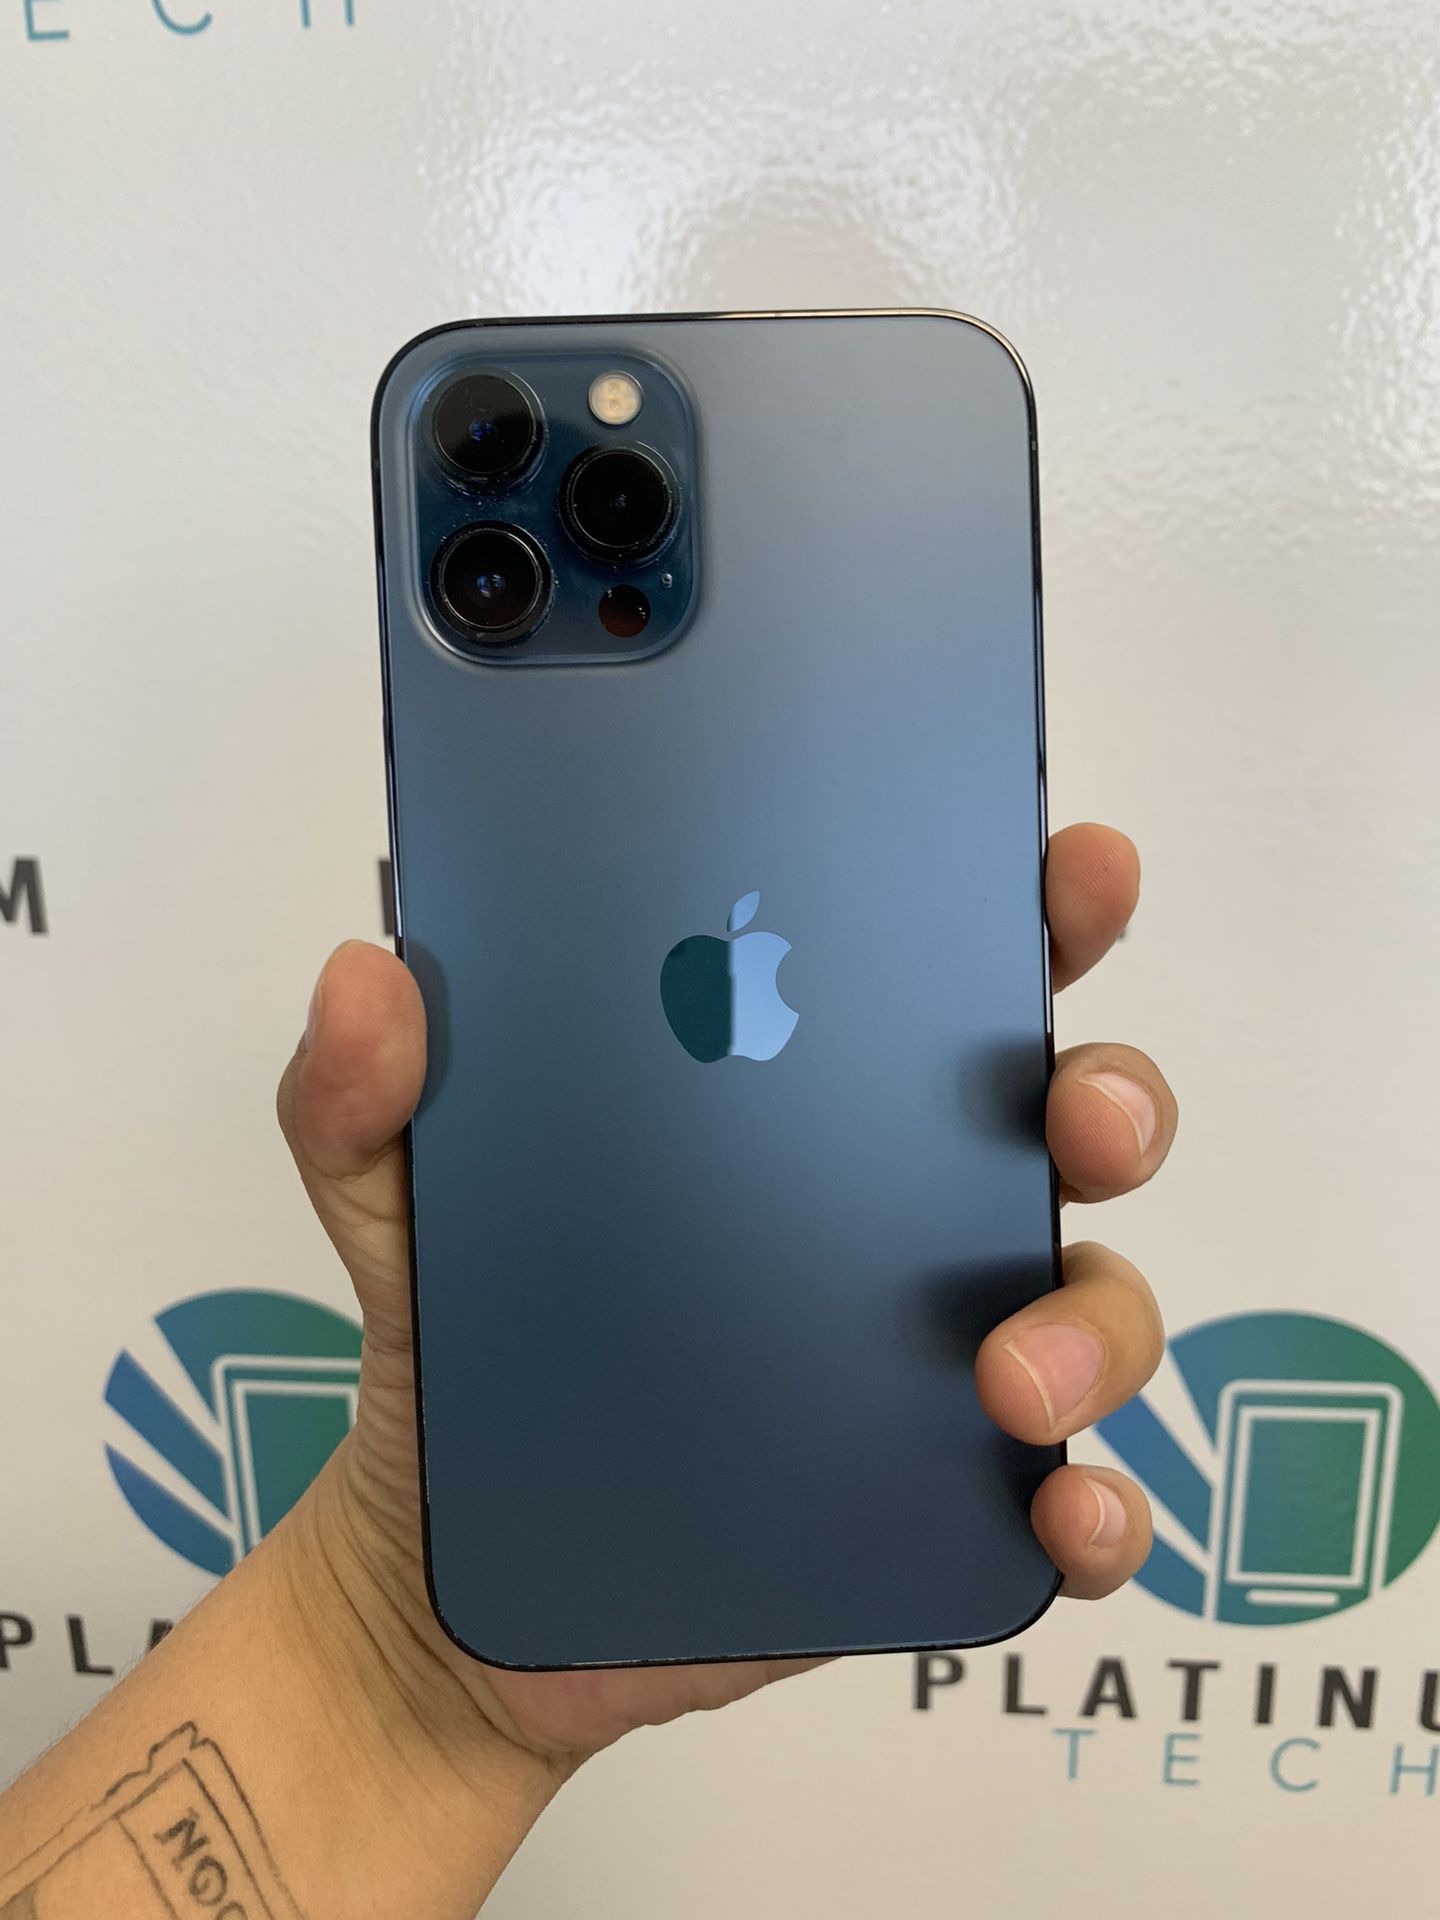 💎📱 iPhone 12 Pro Max 128 GB Unlocked BH82% 🔋 Case And Headphones For Free 👌🏻🤩